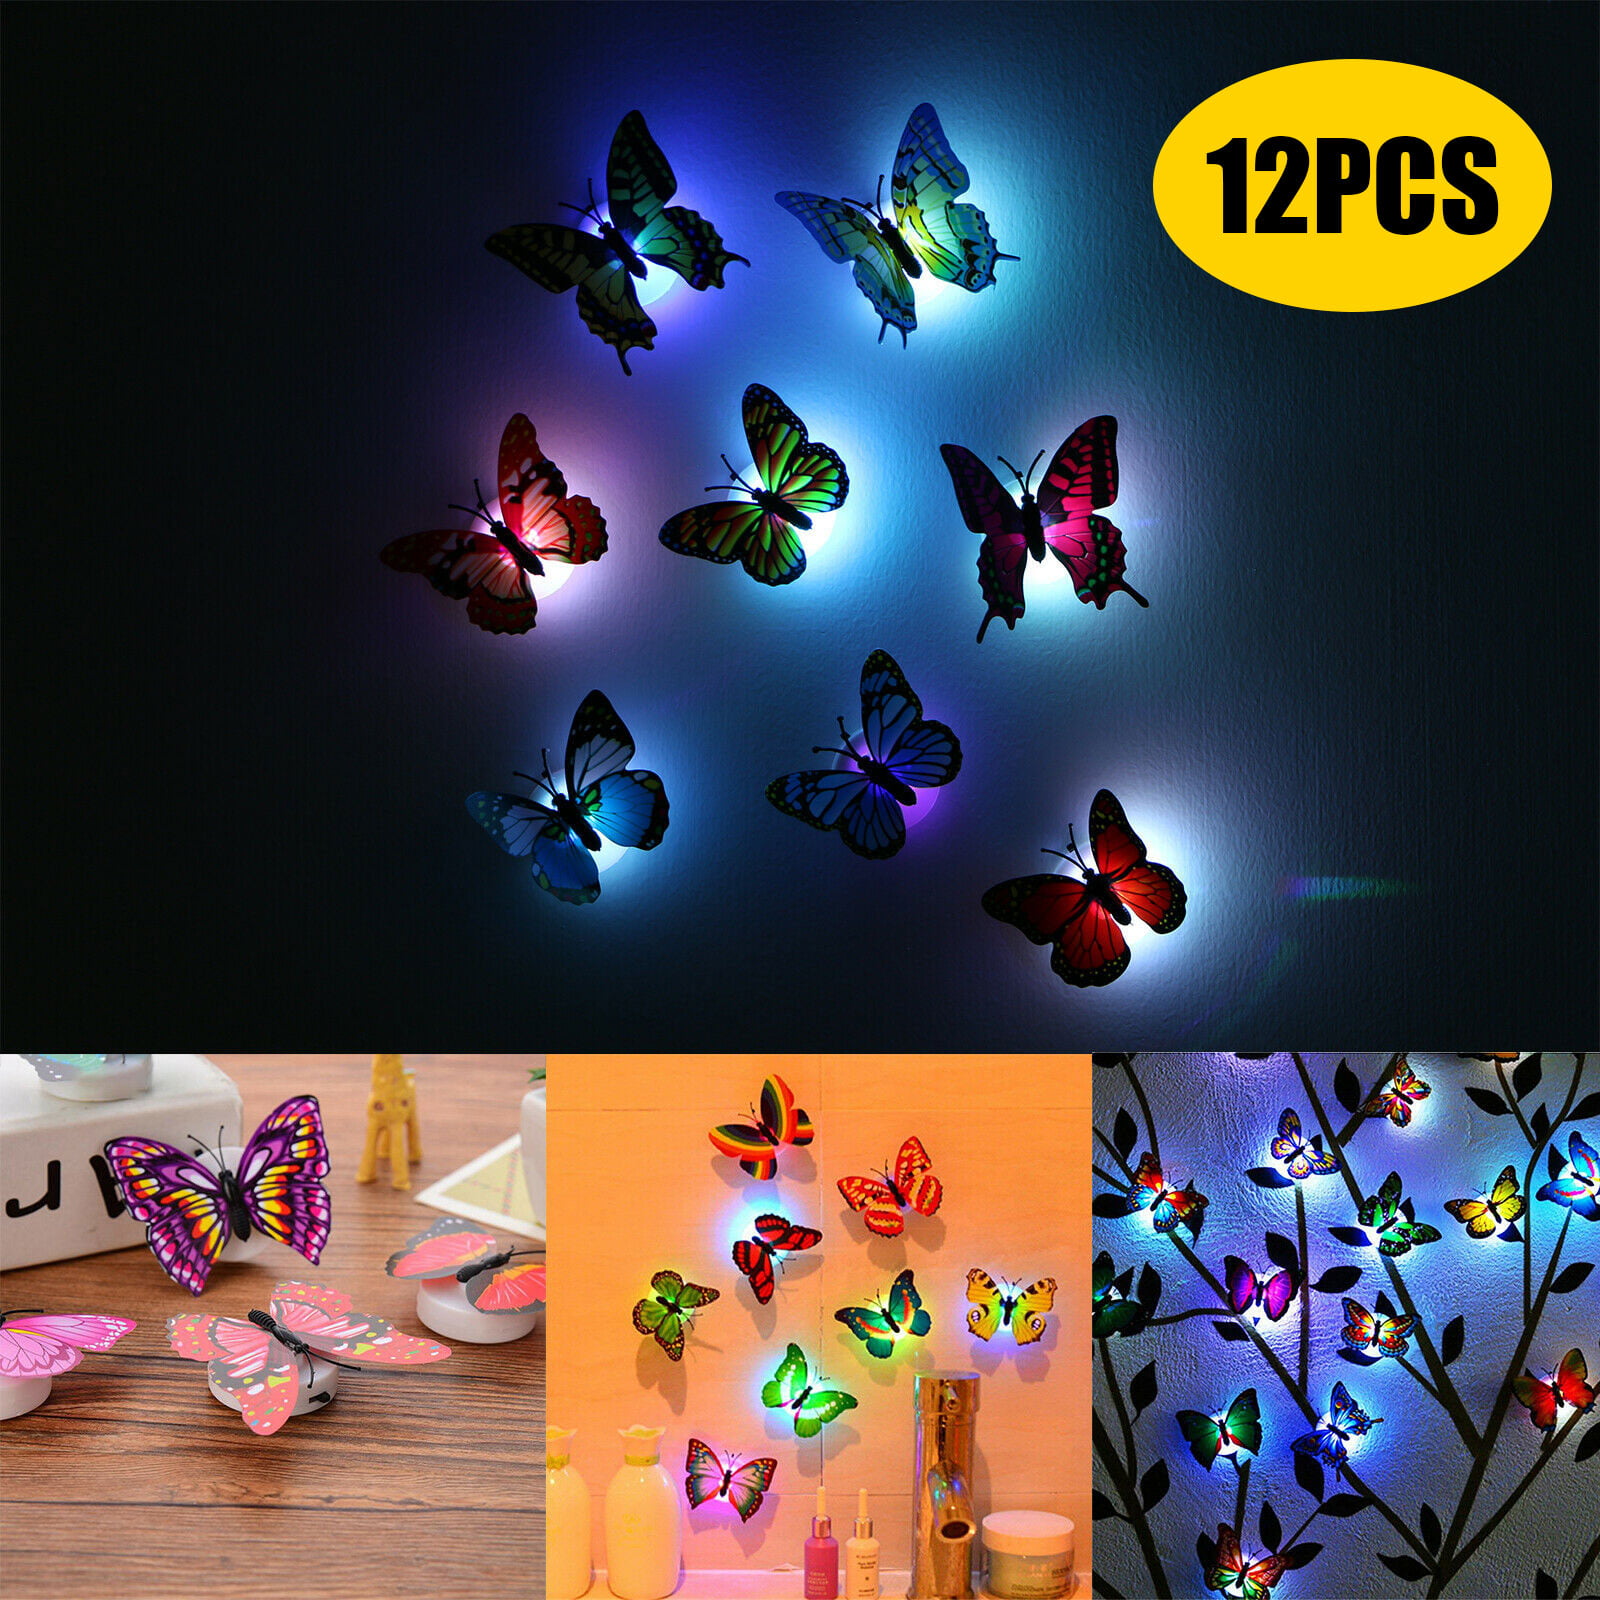 12pcs Changing Colorful Butterfly LED Night Light Luminous Lamp Room Wall Decor 